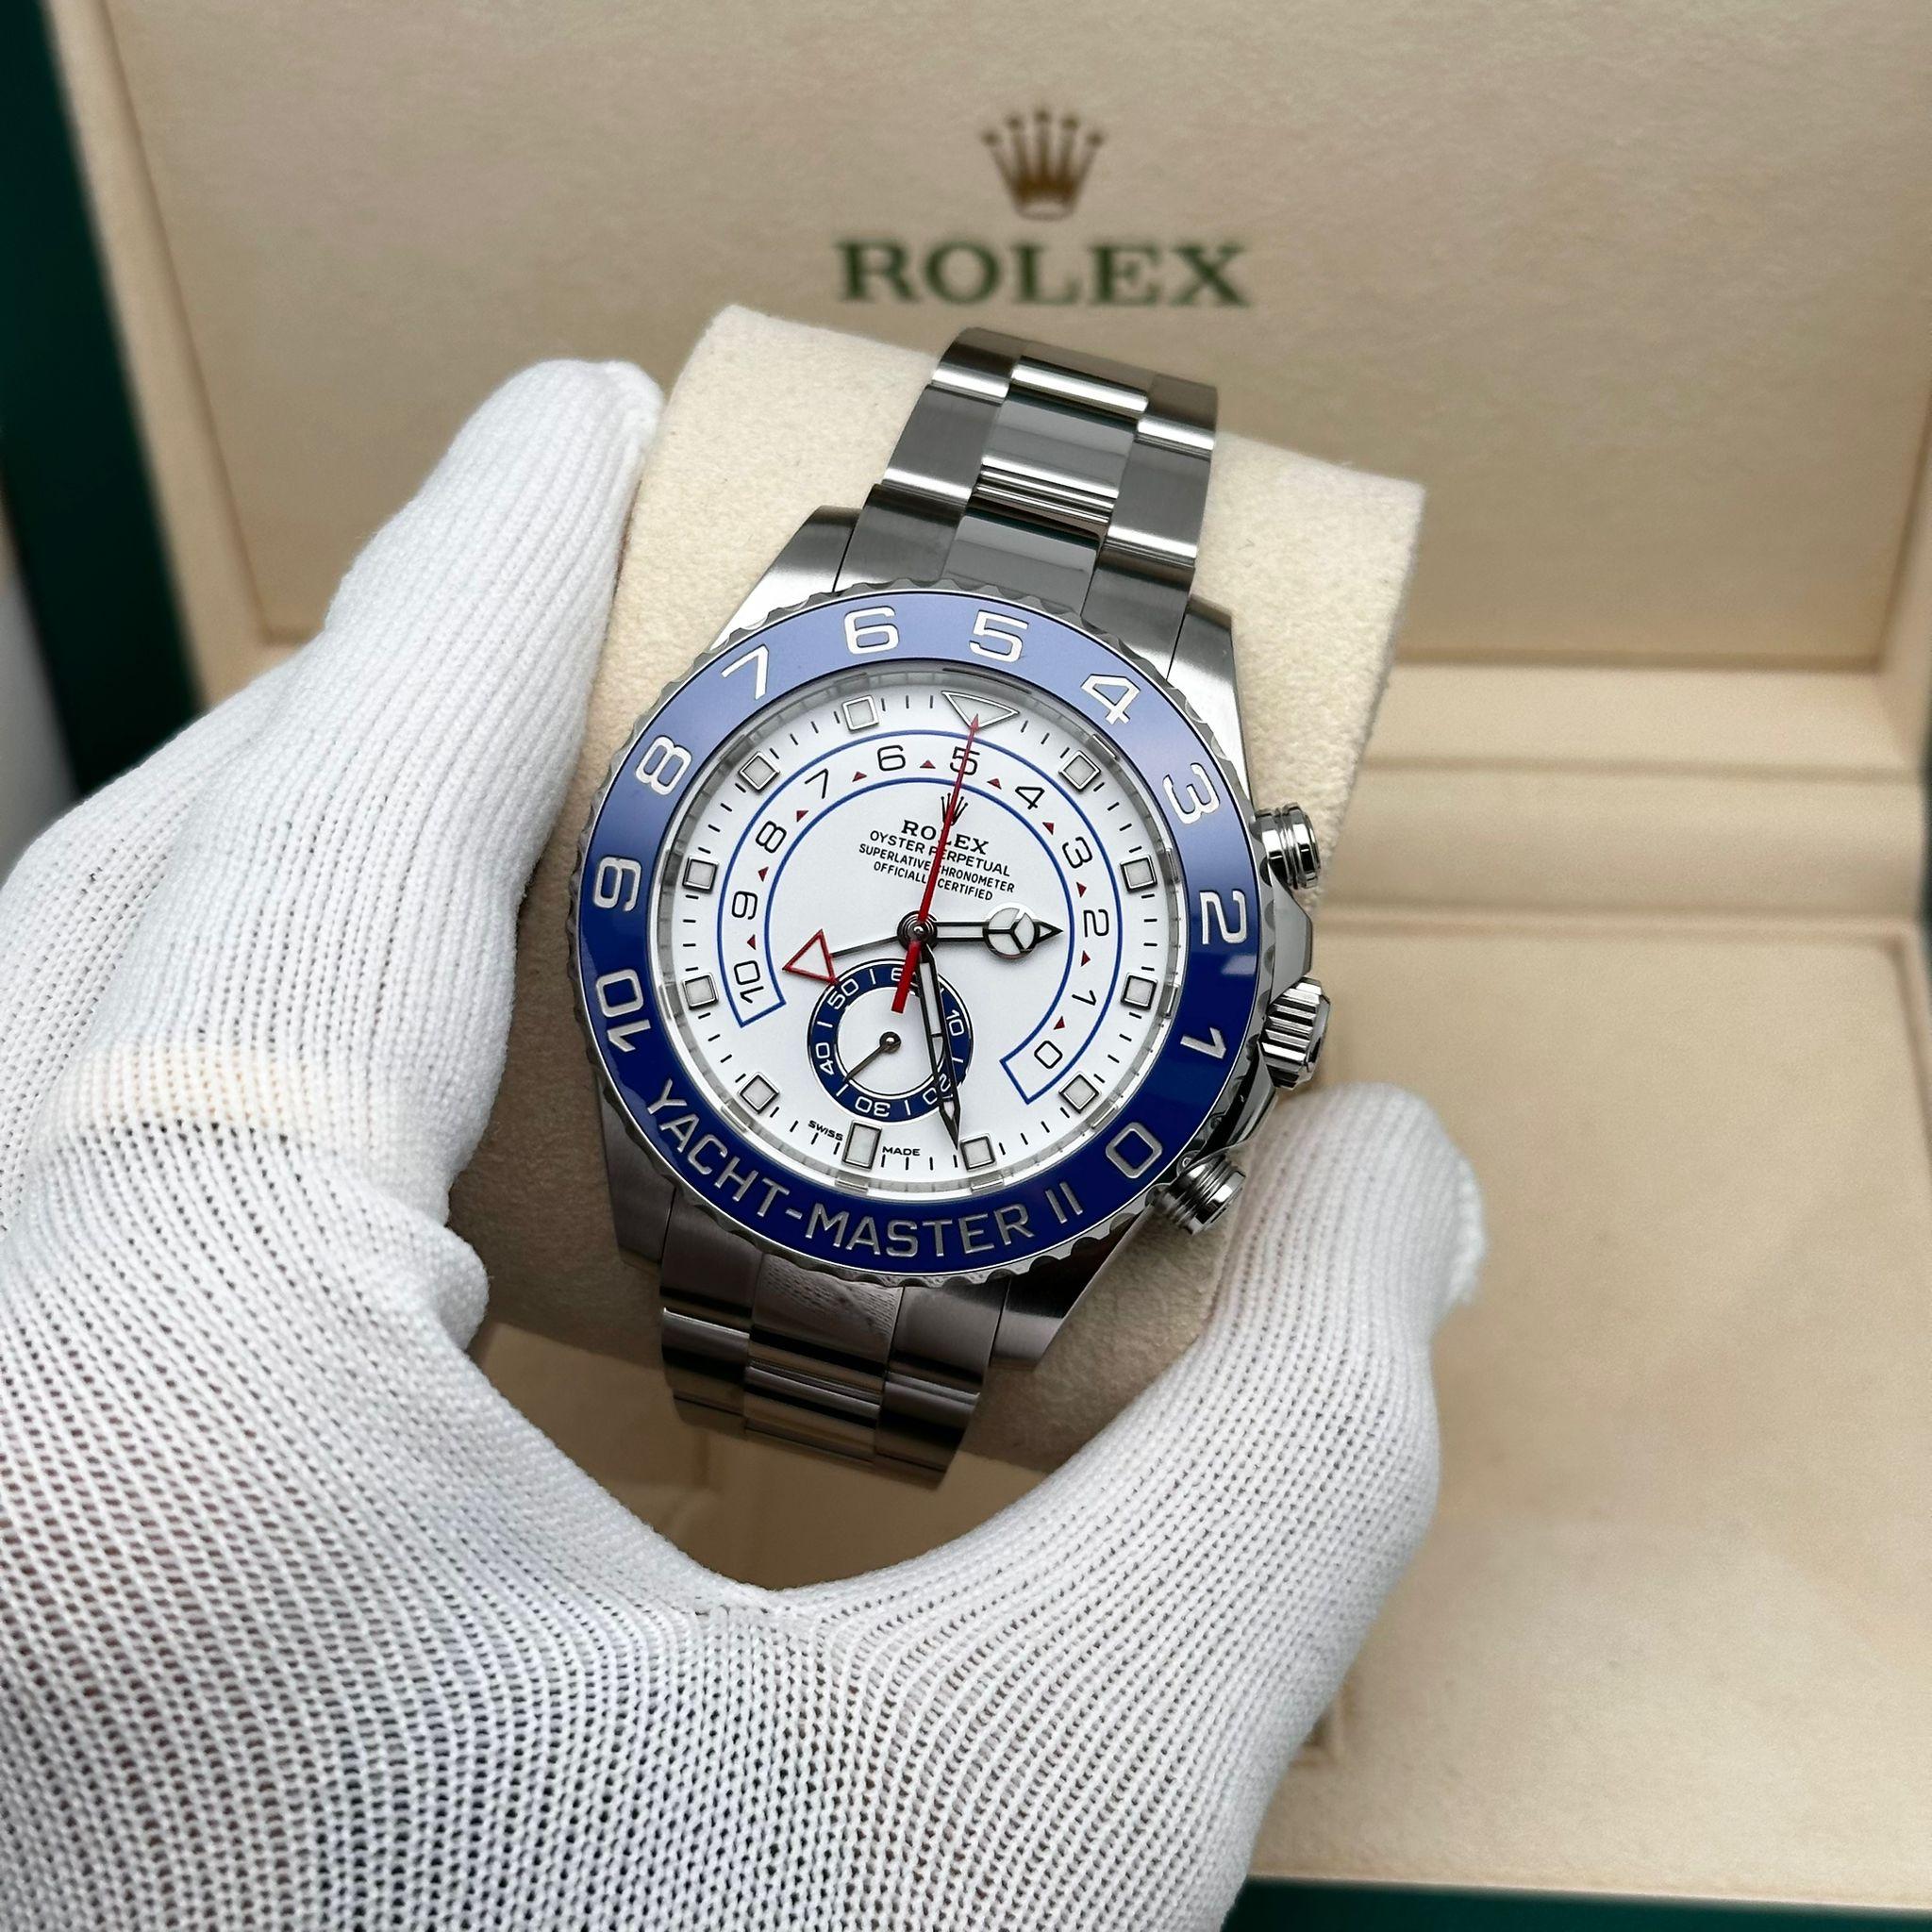 Pre-owned. Mint condition. The original box and papers are included.

* Free Shipping within the USA
* Three-year warranty coverage
* 14-day return policy with a full refund. Buyers can verify the watch's authenticity at any boutique or dealership